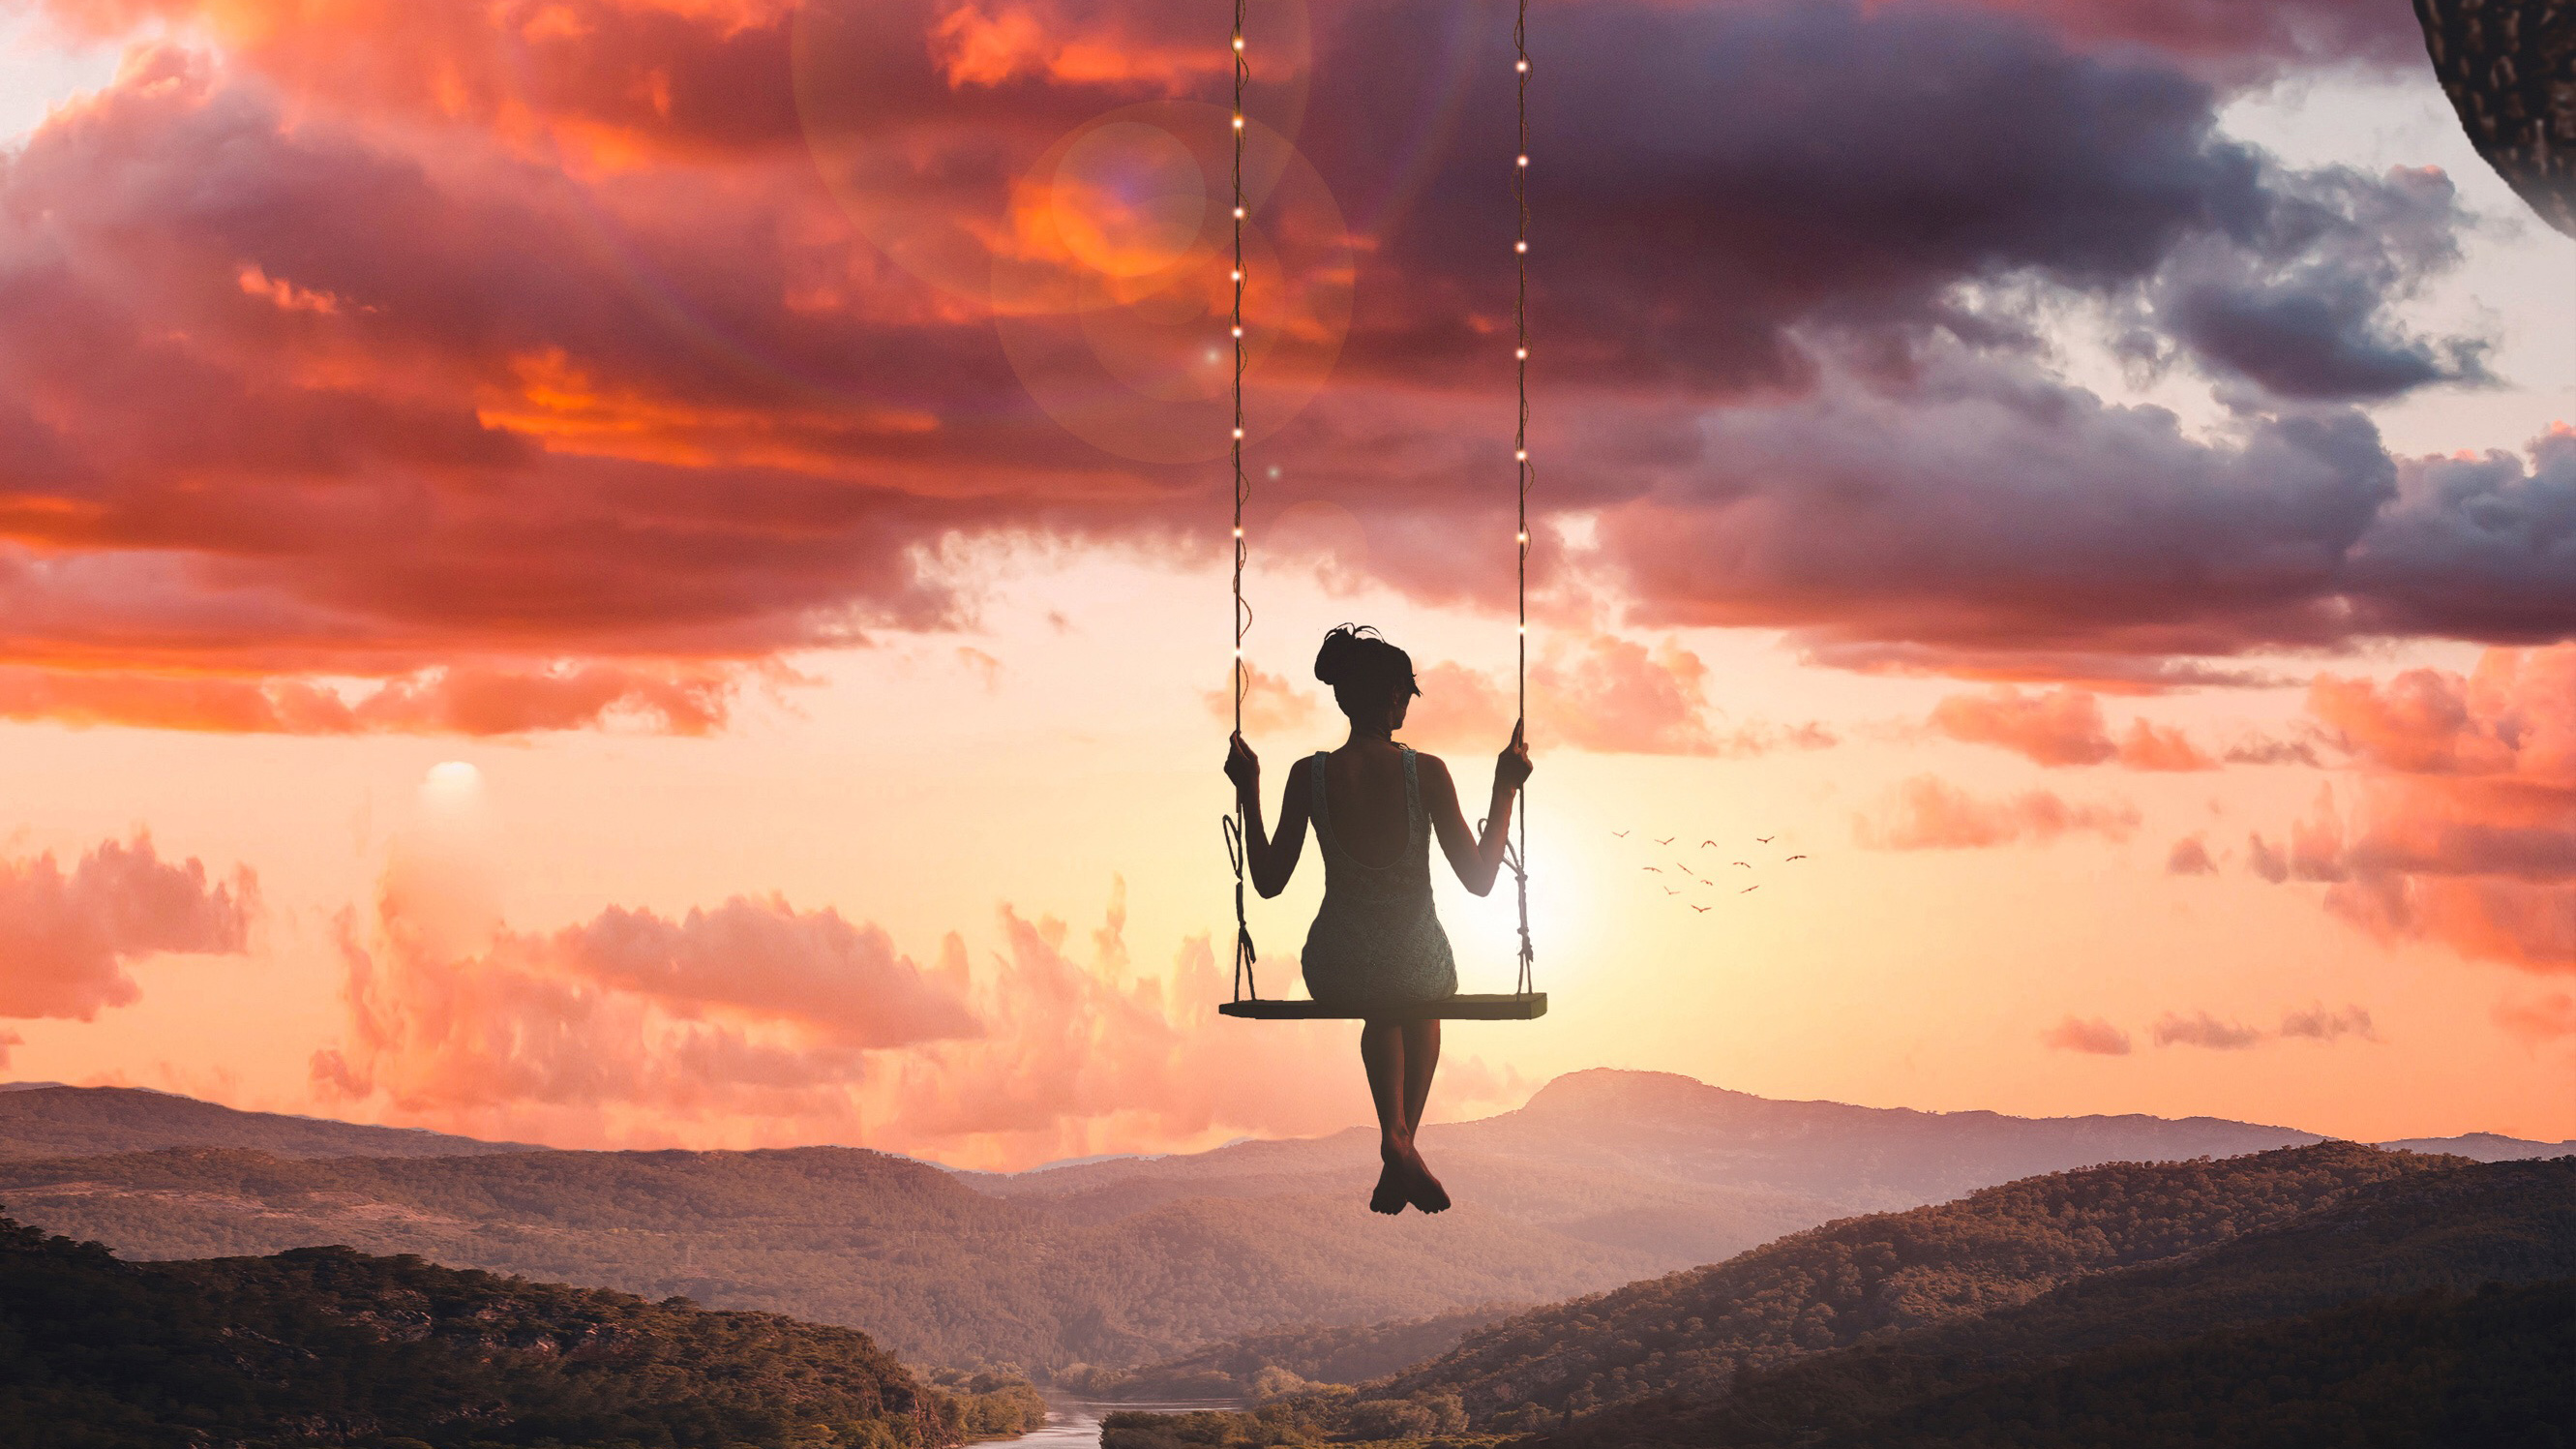 Girl On Swing From The World - HD Wallpaper 